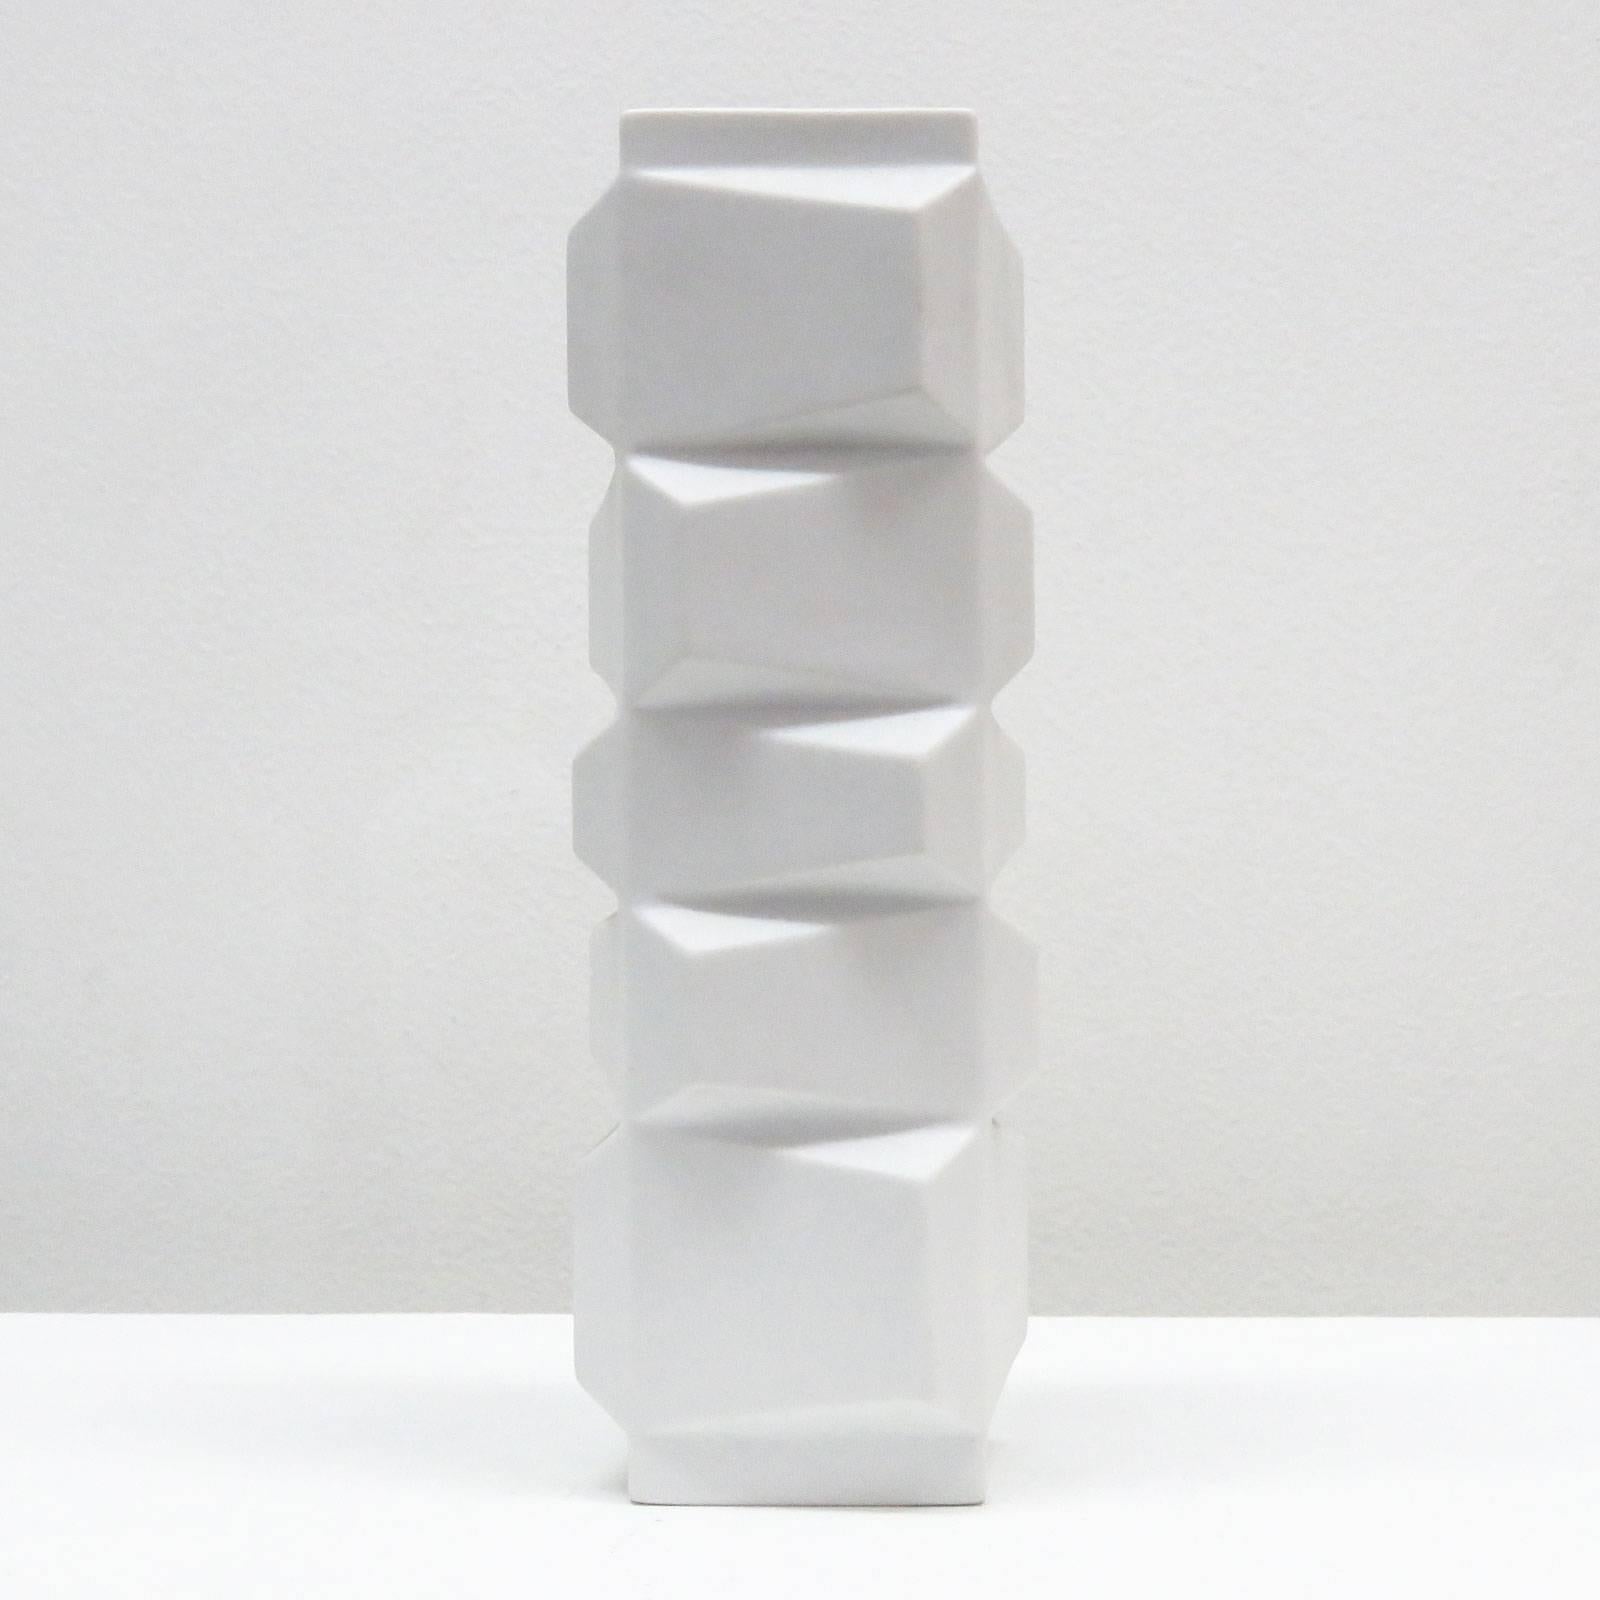 Wonderful geometric bisque porcelain vase by Heinrich Fuchs for Hutschenreuther, released between 1968 and 1970 with matte exterior and glazed interior, marked Fuchs 5092/27.